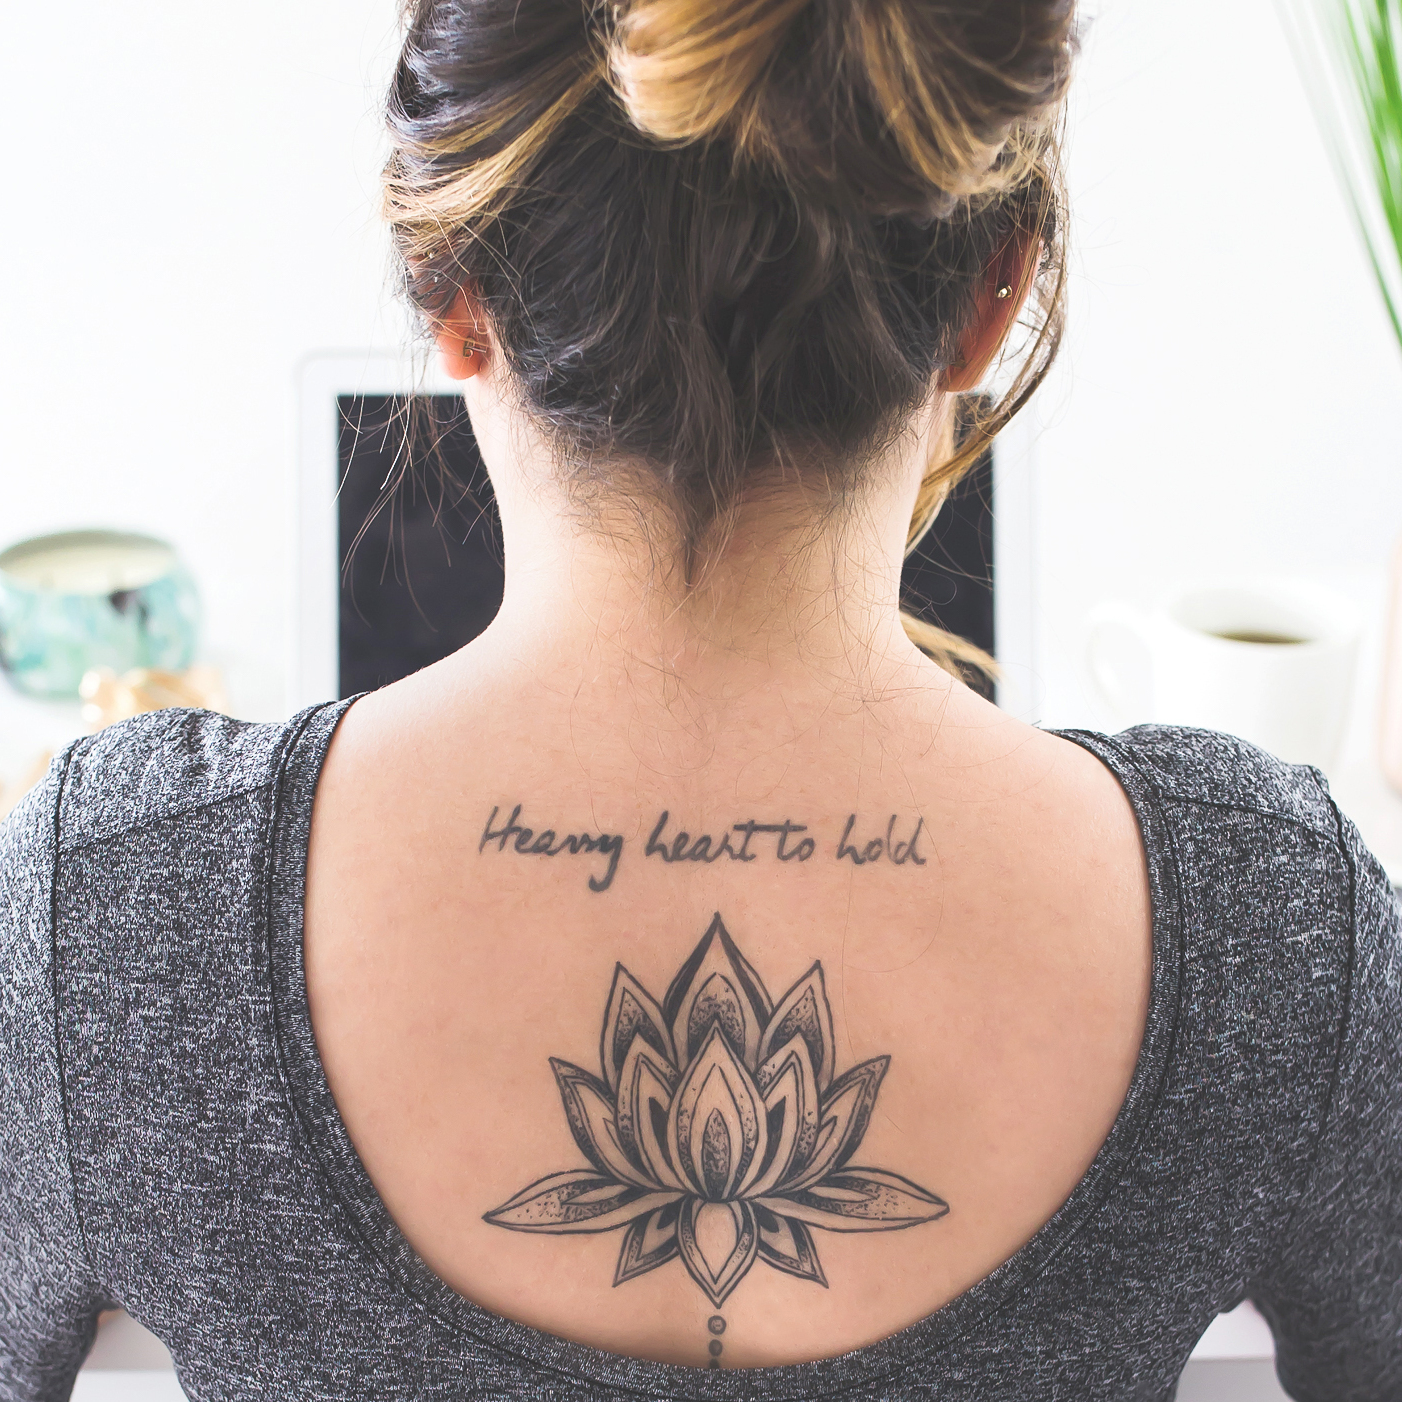 How getting a tattoo can be a form of therapy for anxiety and depression